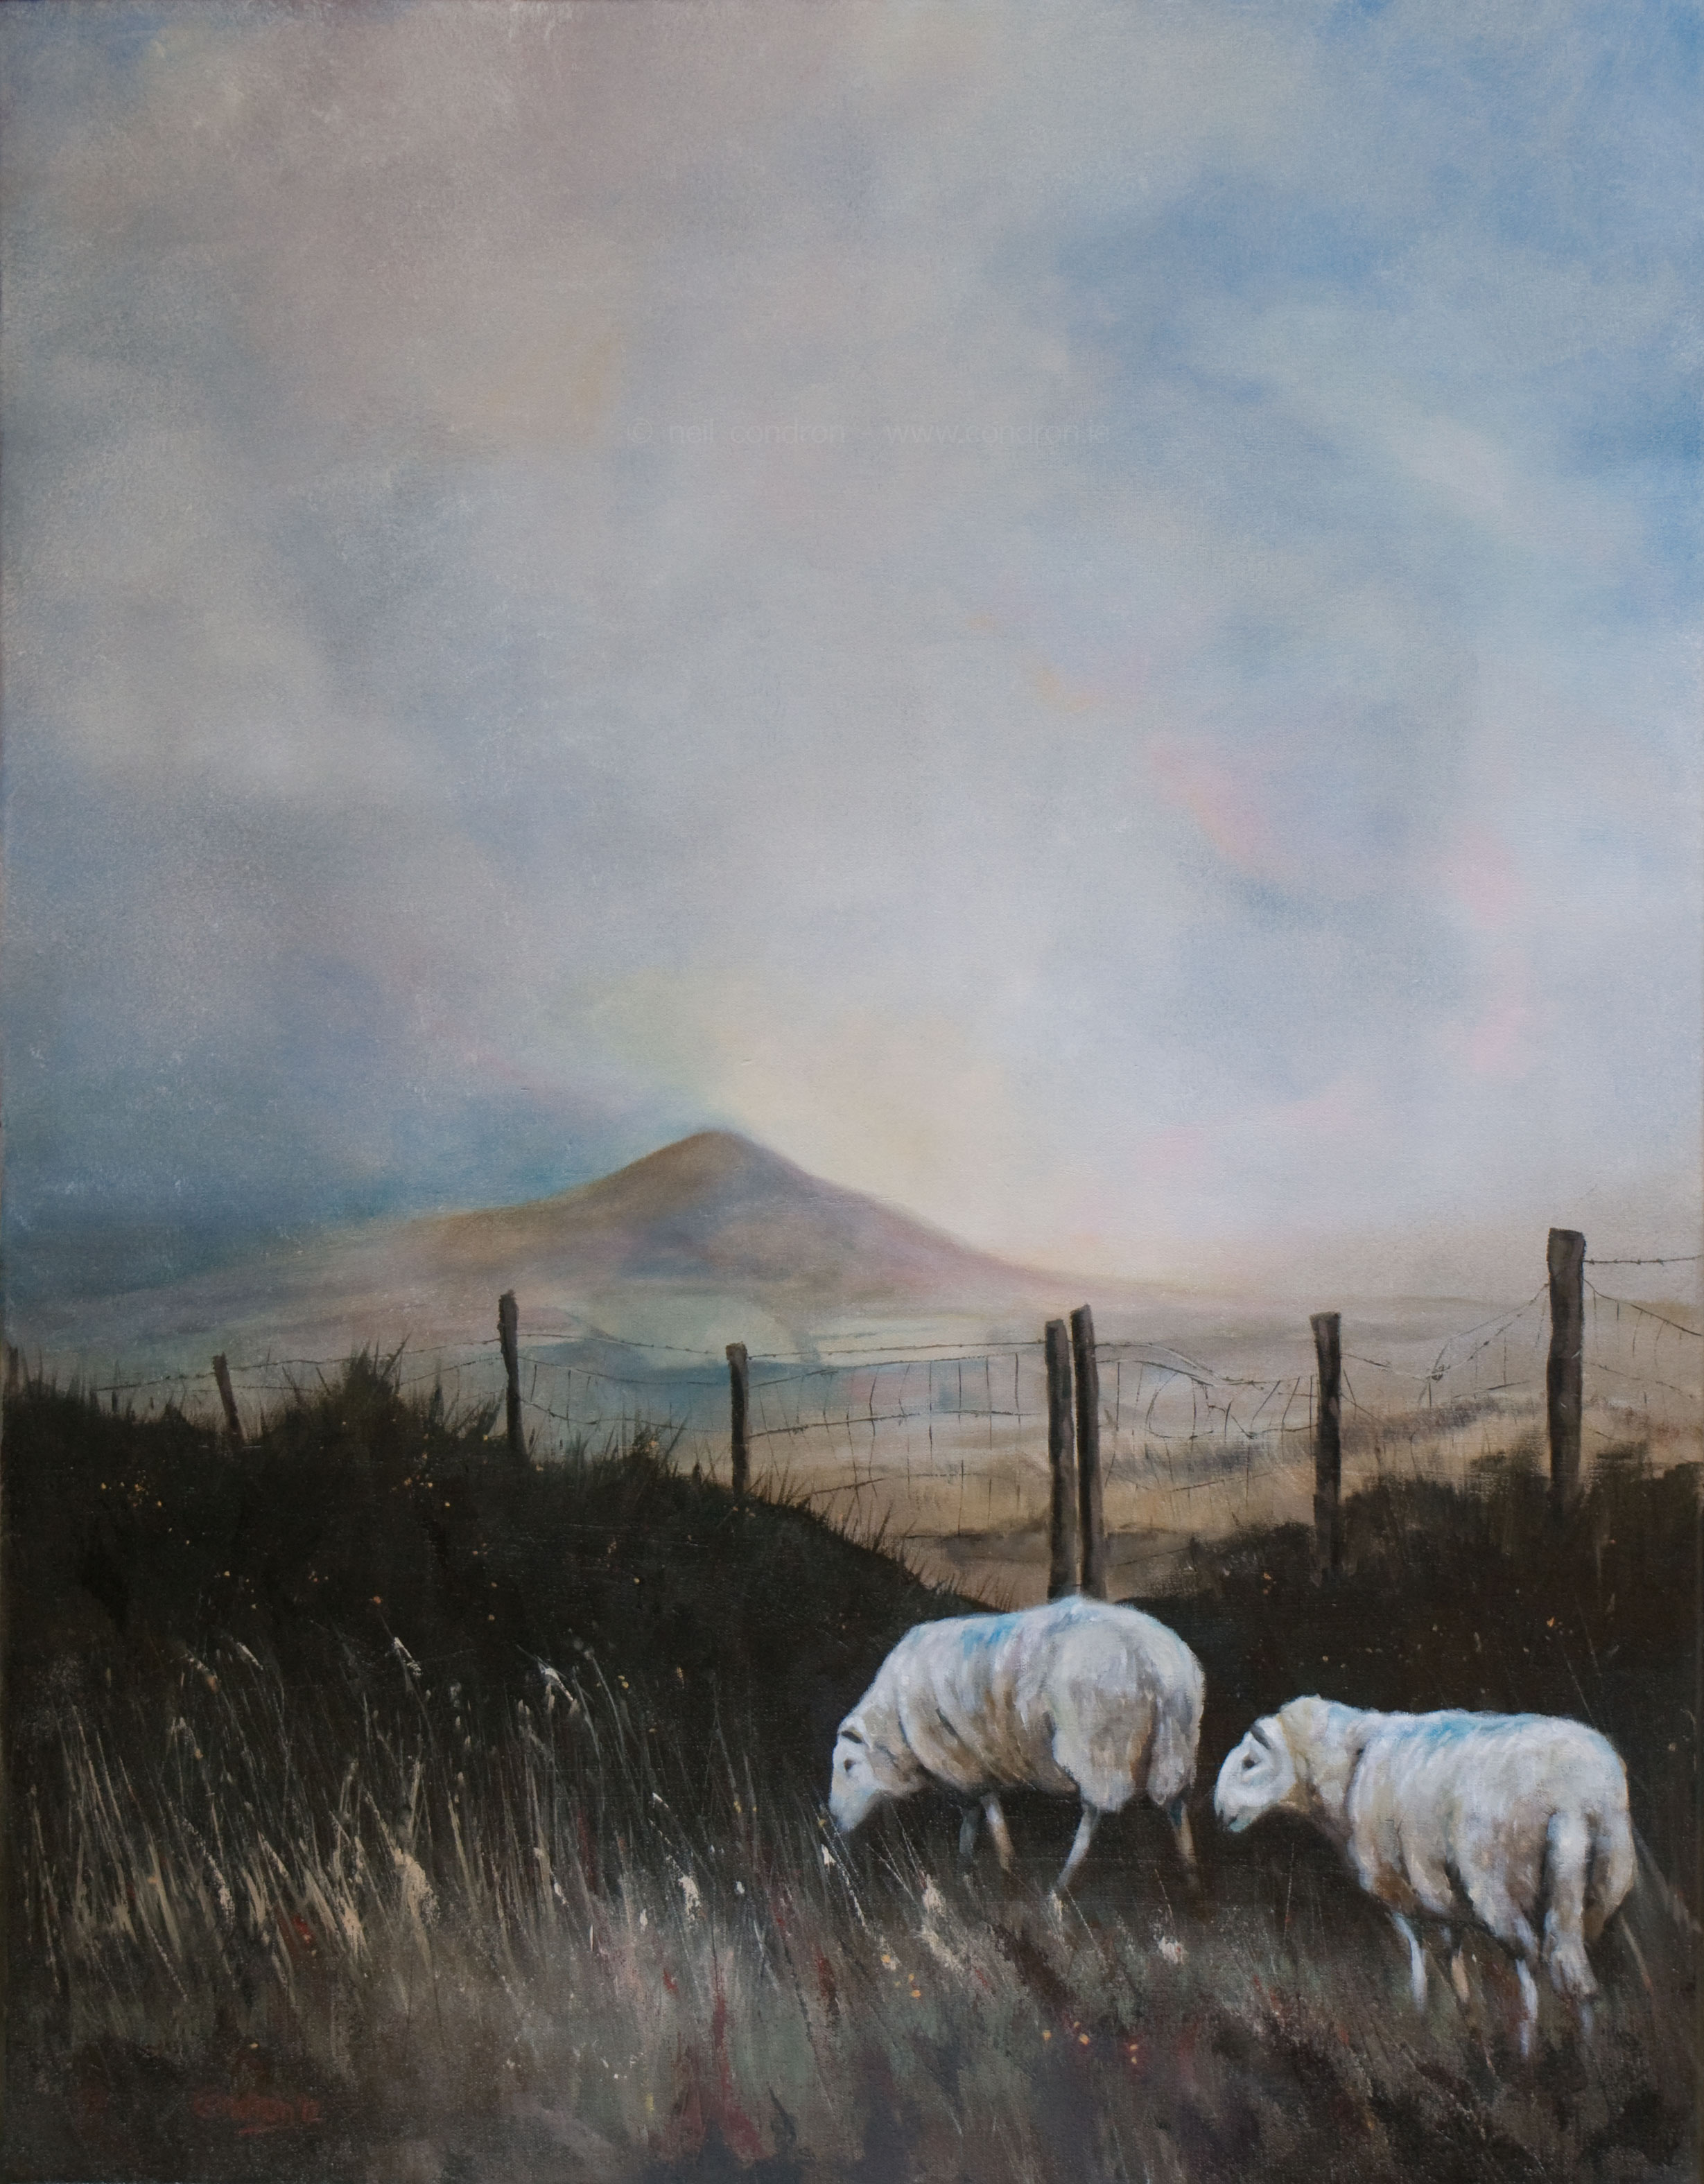 'Two Sheep and the Sugarloaf' by Neil Condron